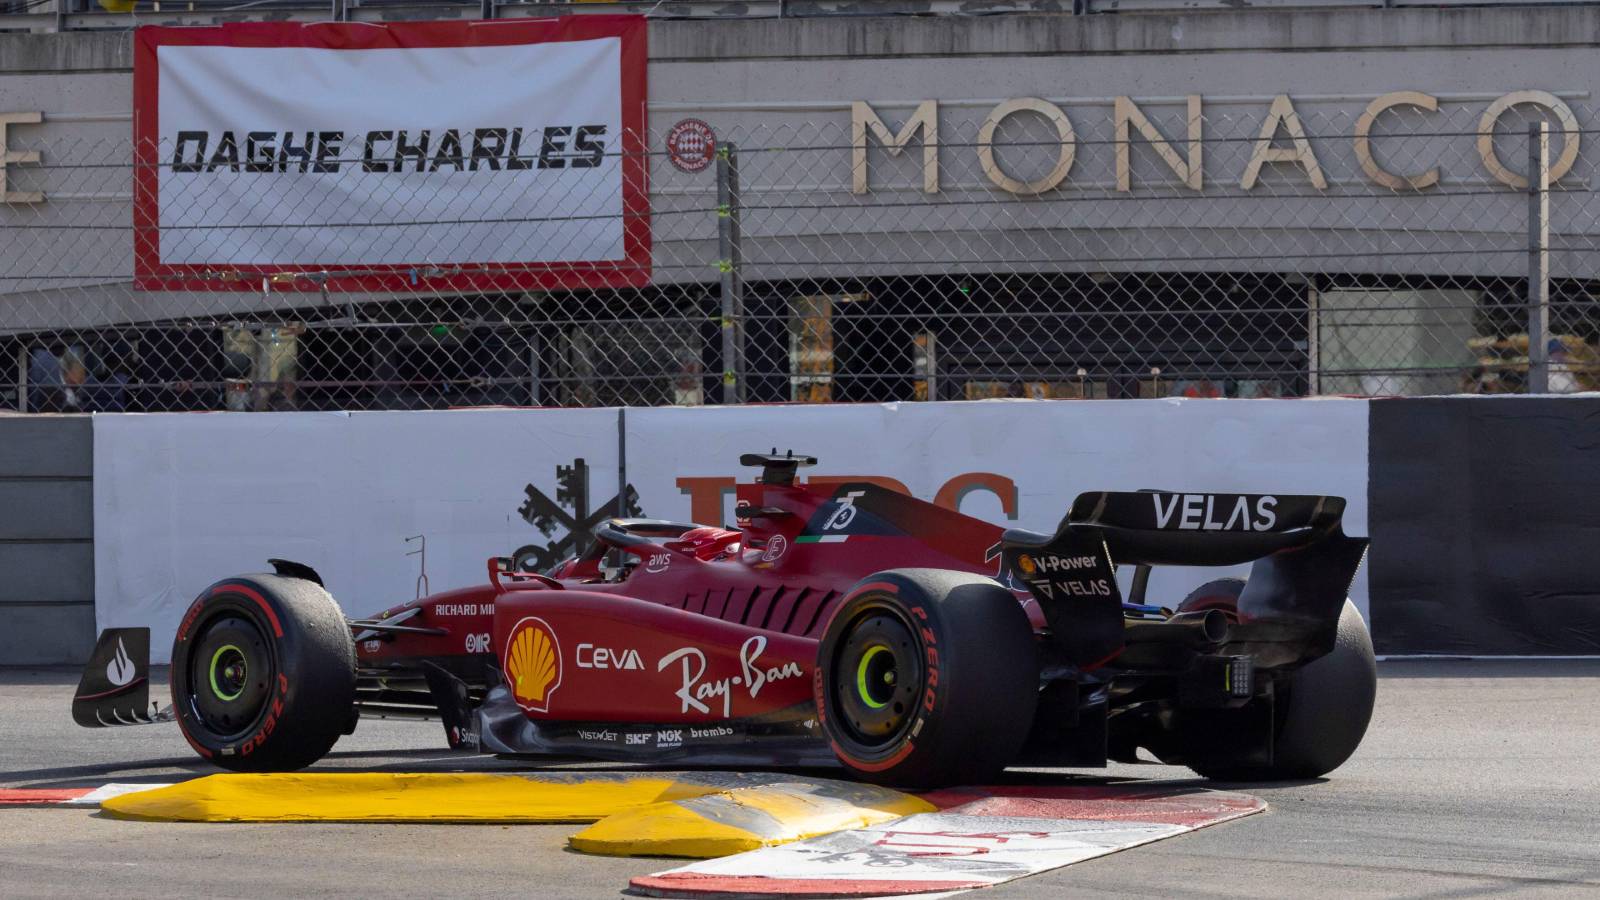 Charles Leclerc drives past a banner dedicated to him. Monte Carlo May 2022.